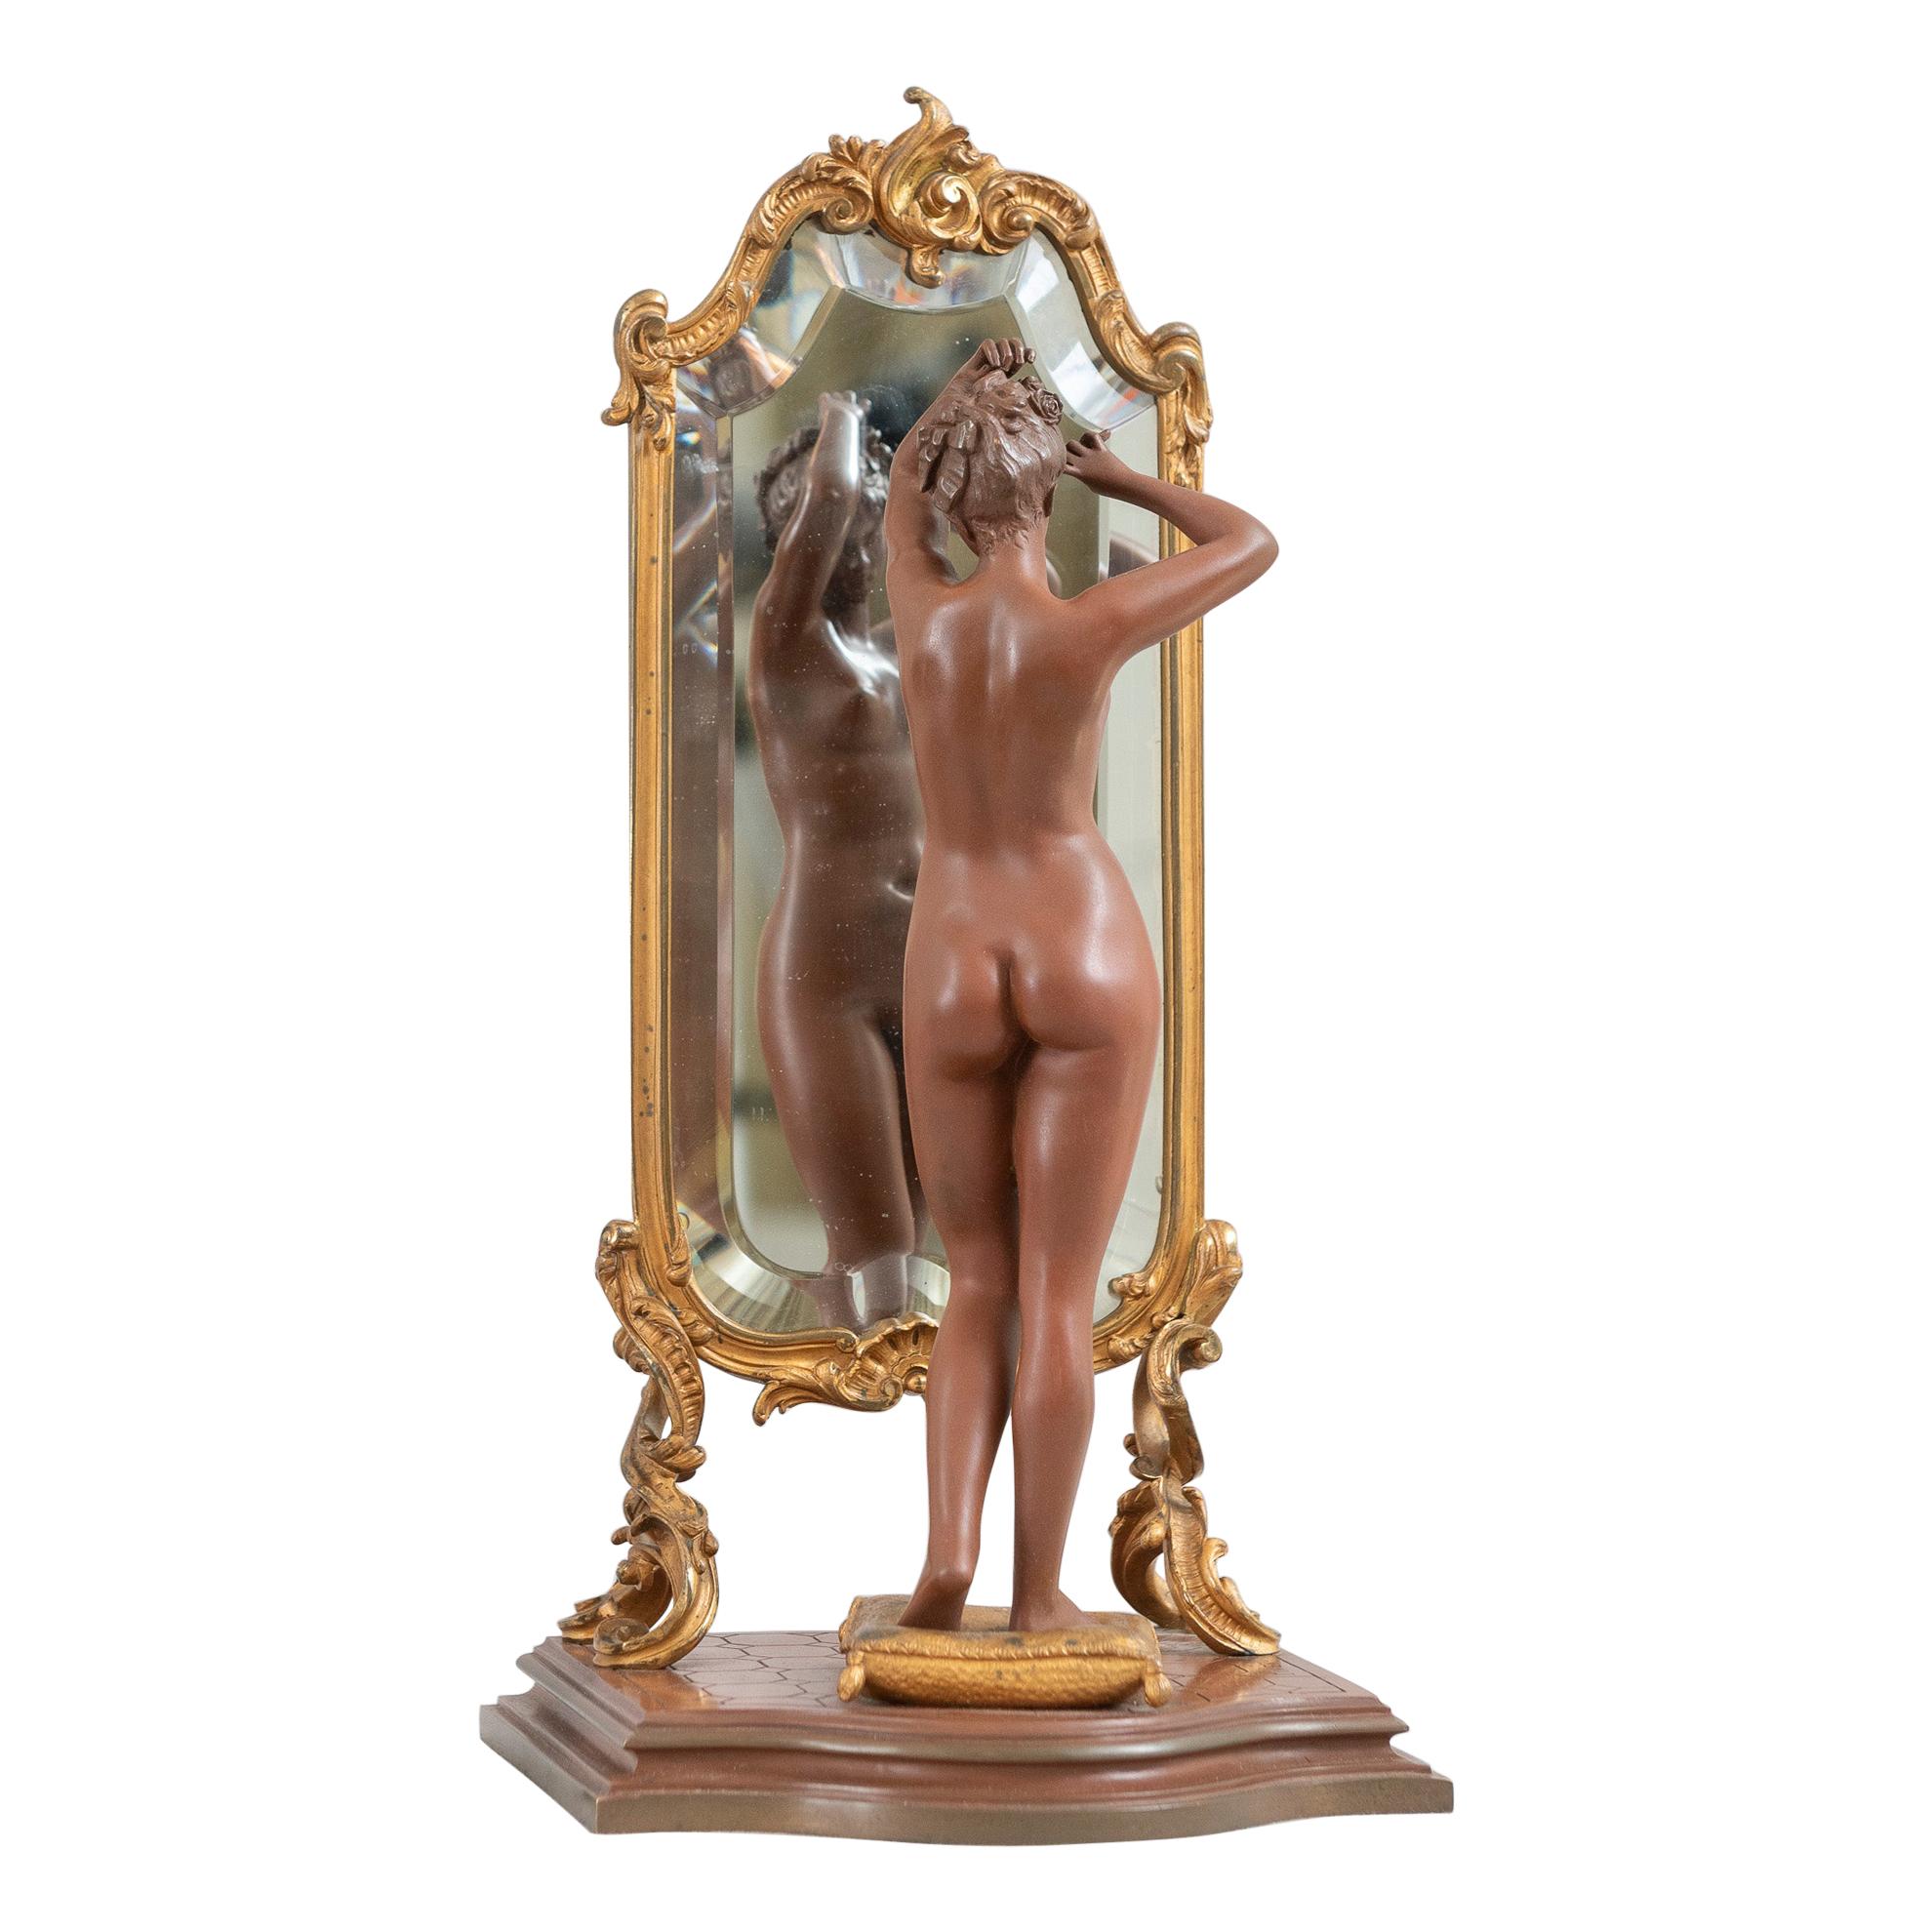 Antique French Bronze, Nude w/ Cheval Mirror, Artist Signed "Pinedo", ca. 1890